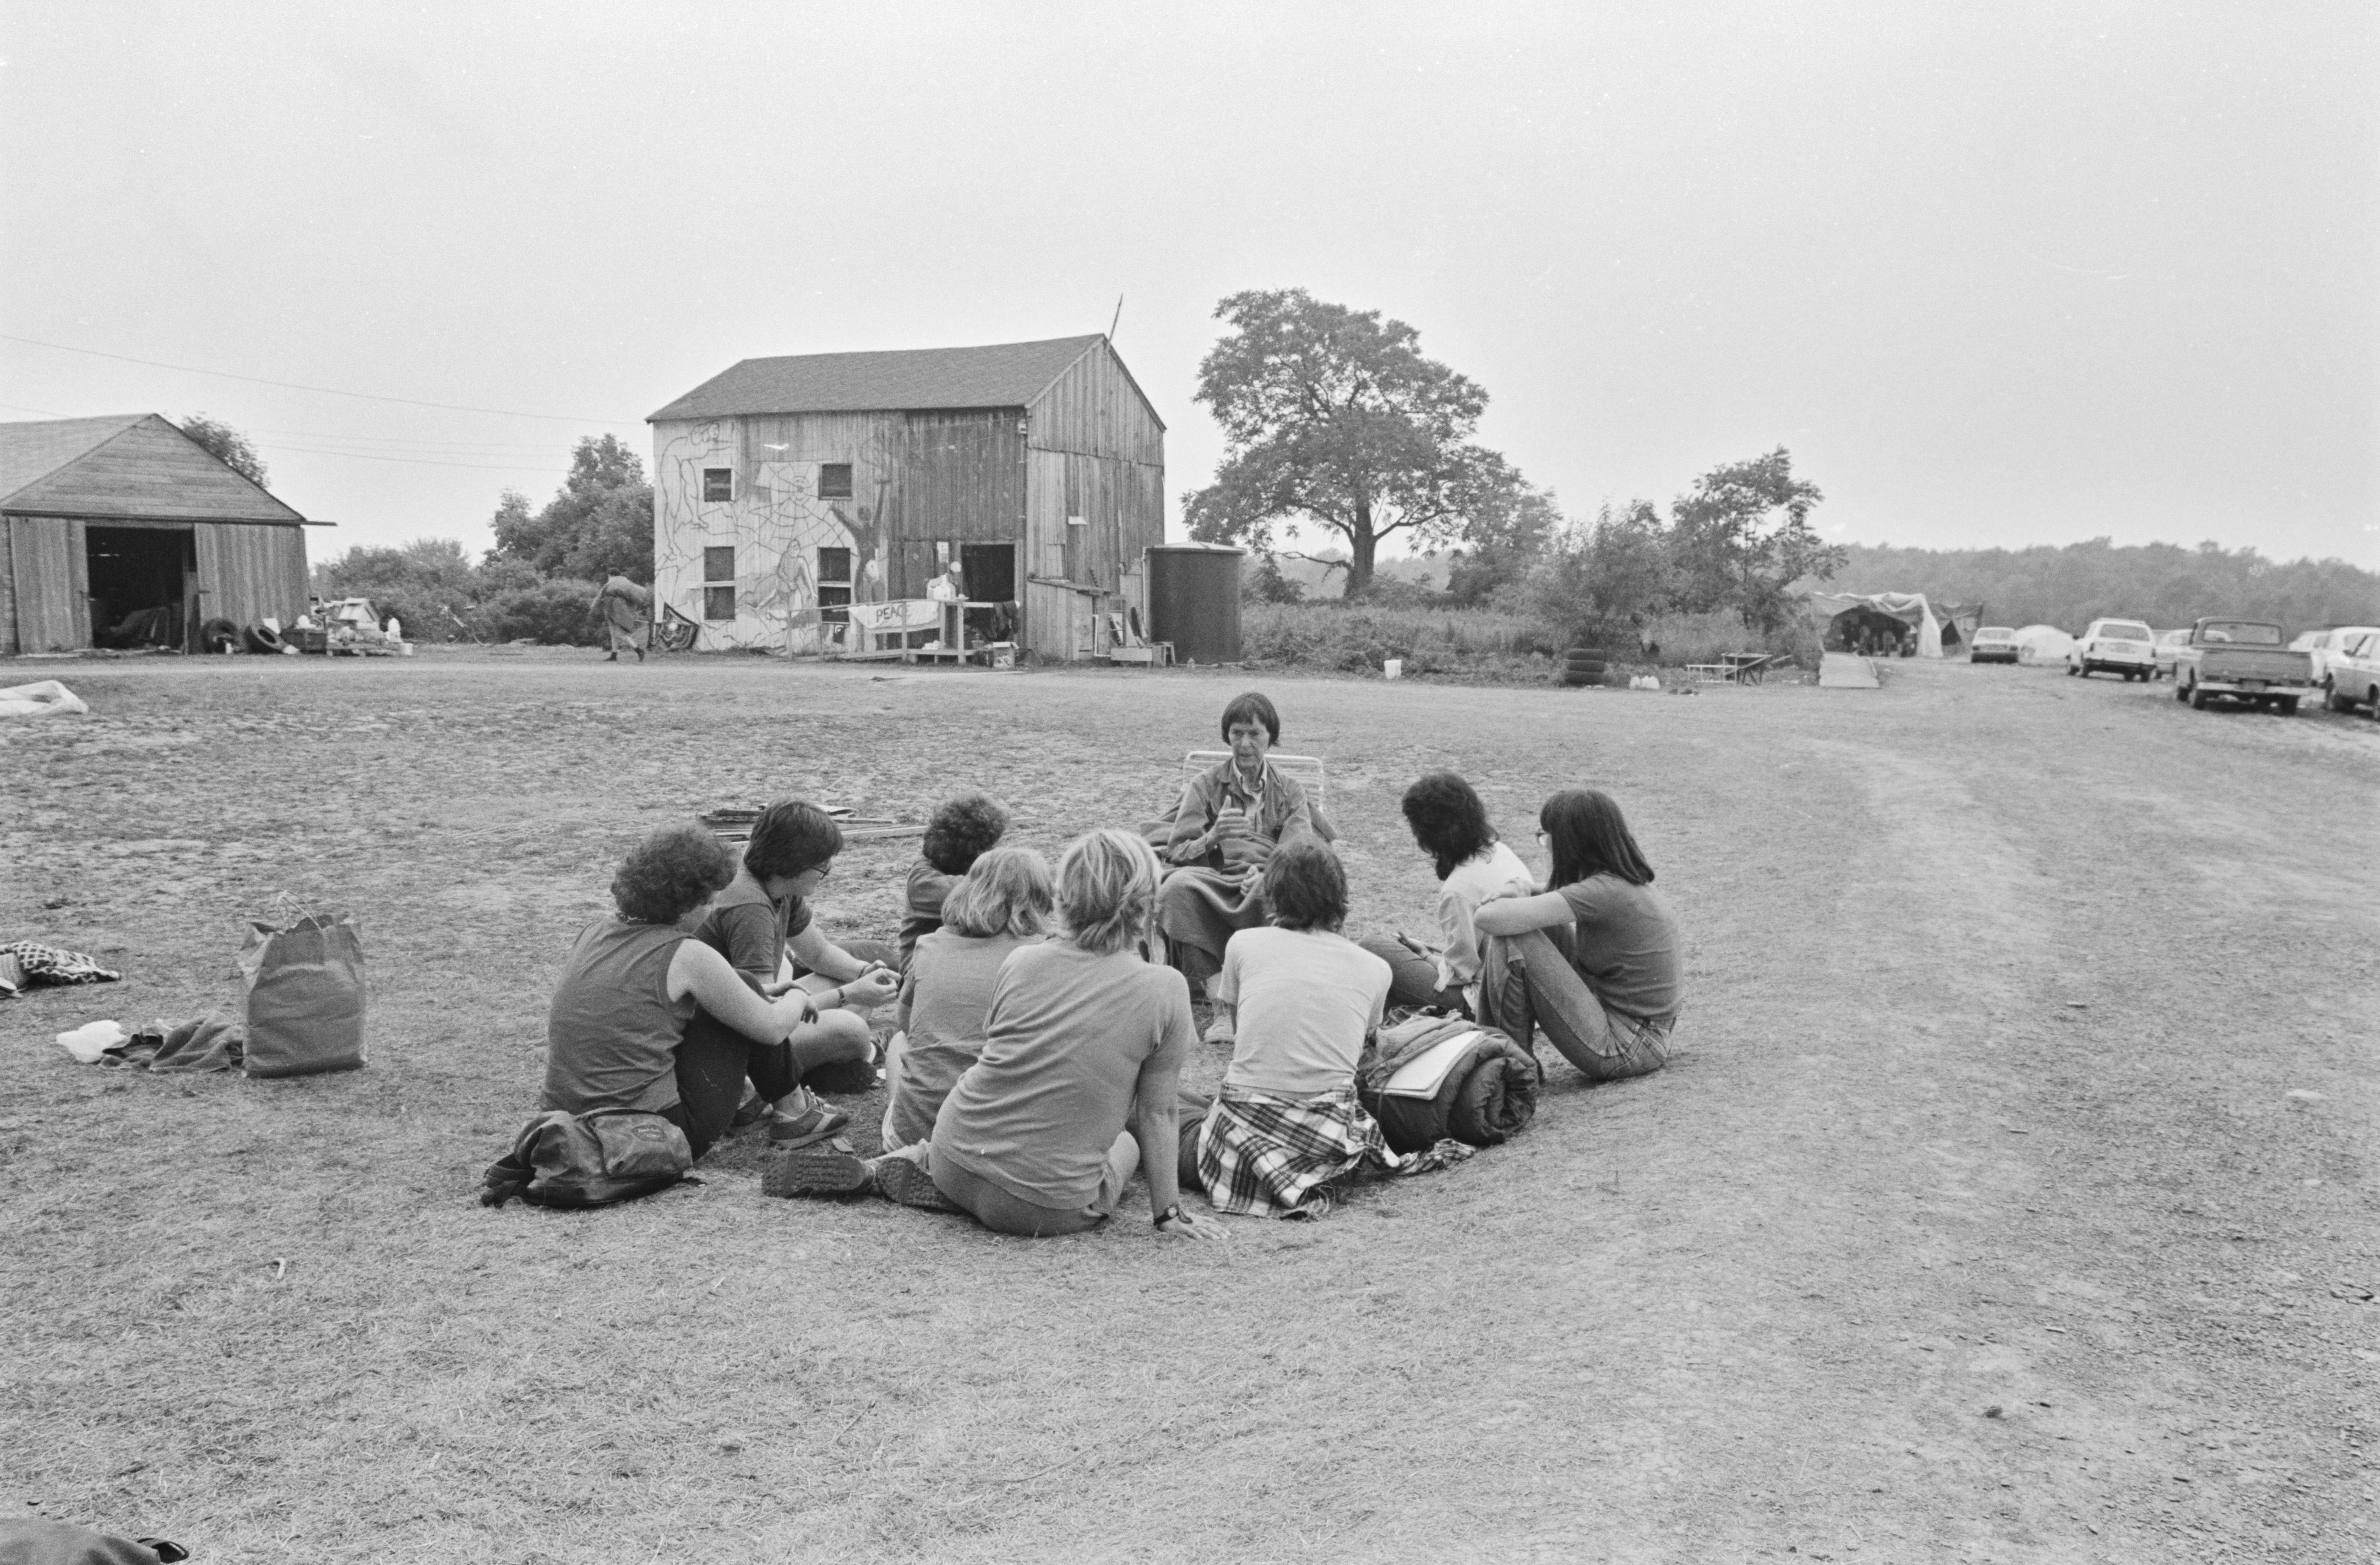 Barbara Deming with a circle of women seated on the ground